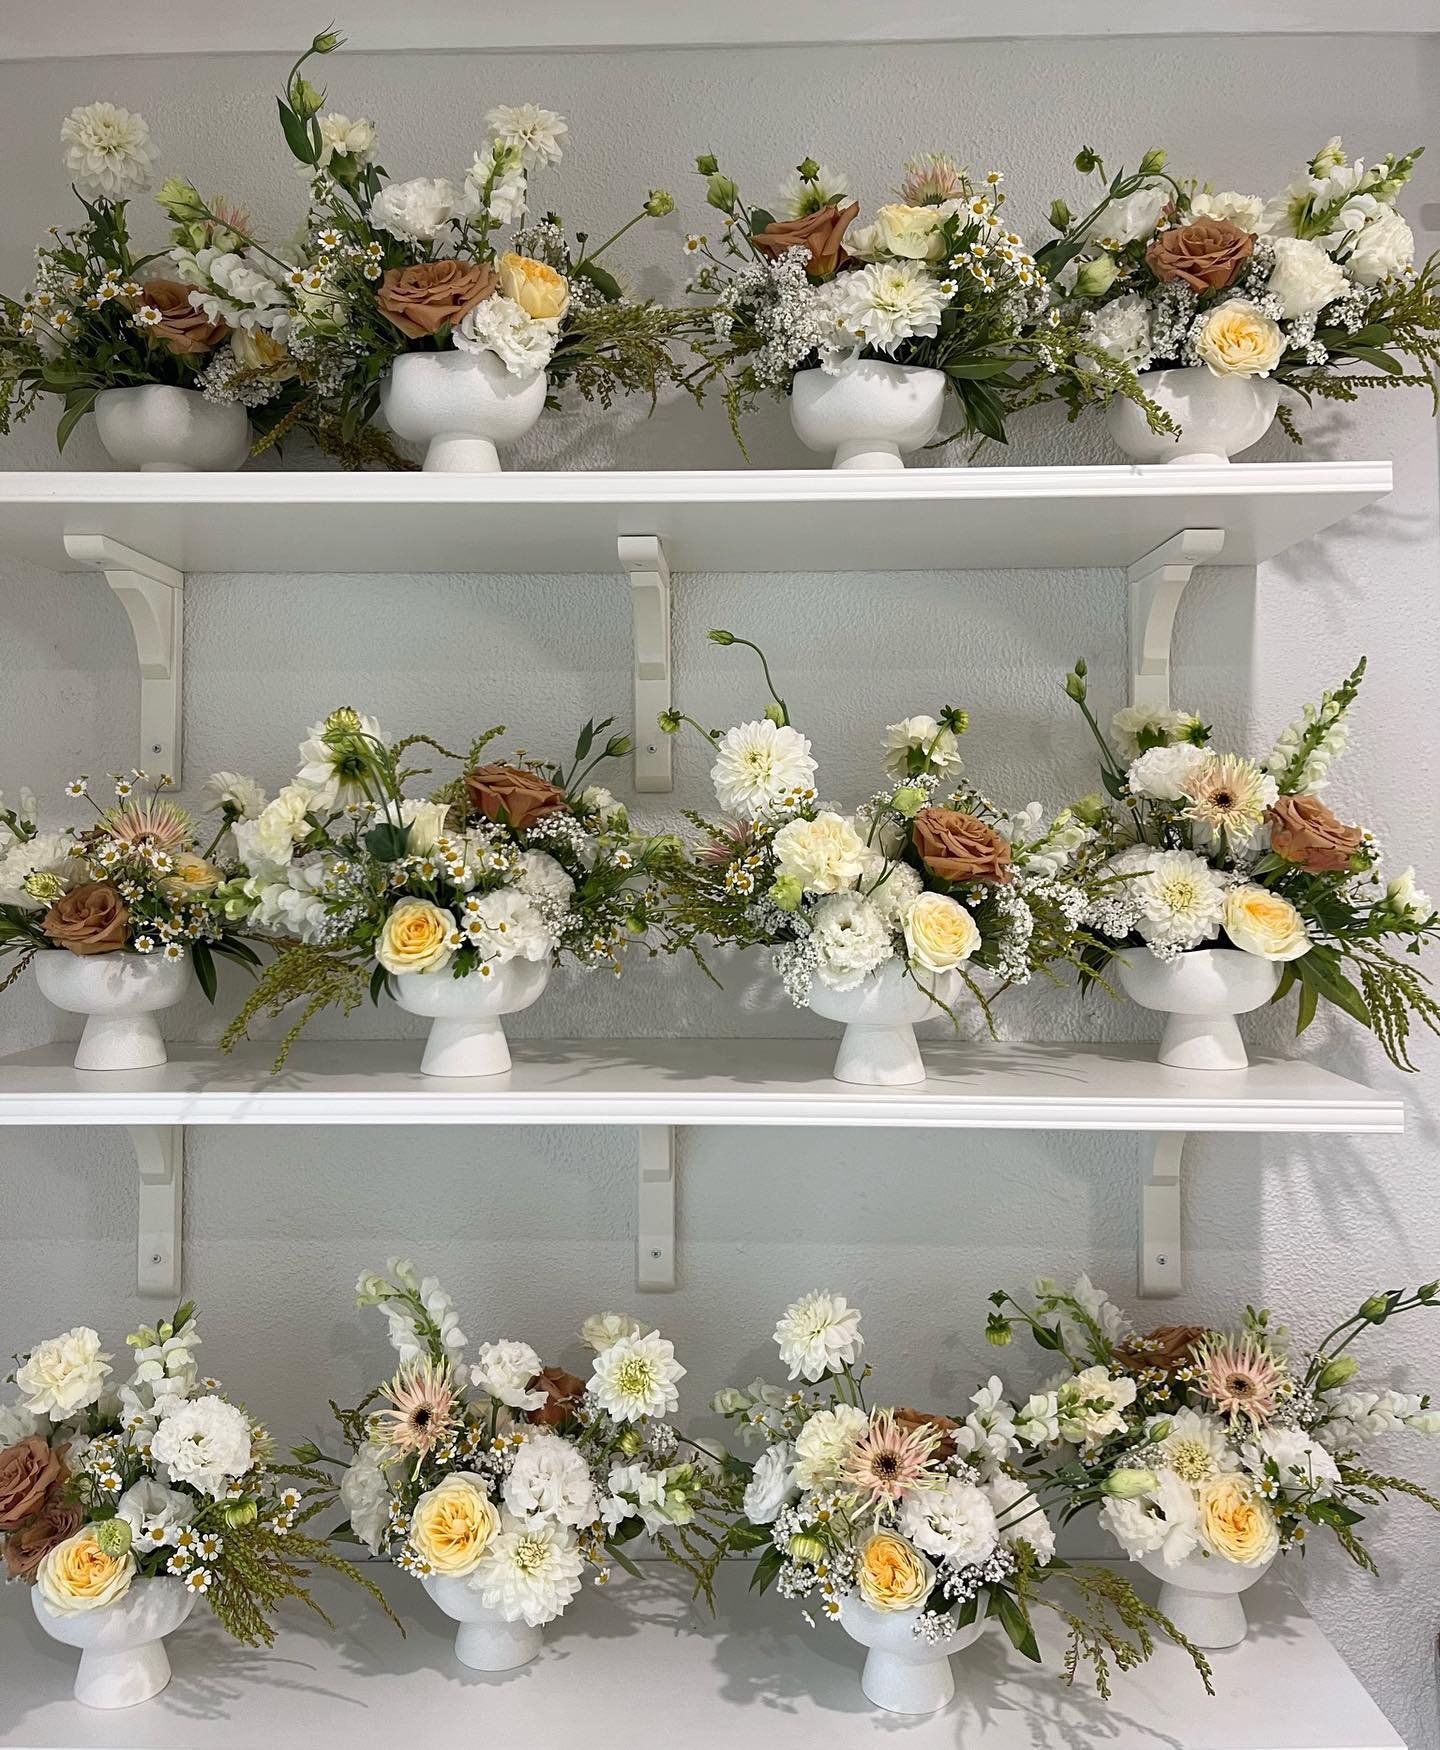 Compotes sitting pretty on our studio shelves 🌼
⠀⠀⠀⠀⠀⠀⠀⠀⠀
These beauties were for Kathryn &amp; Tom and were the perfect addition to their reception tables at @malibraefarm . The colours complimented the rustic vibe of the room perfectly. 
⠀⠀⠀⠀⠀⠀⠀⠀⠀